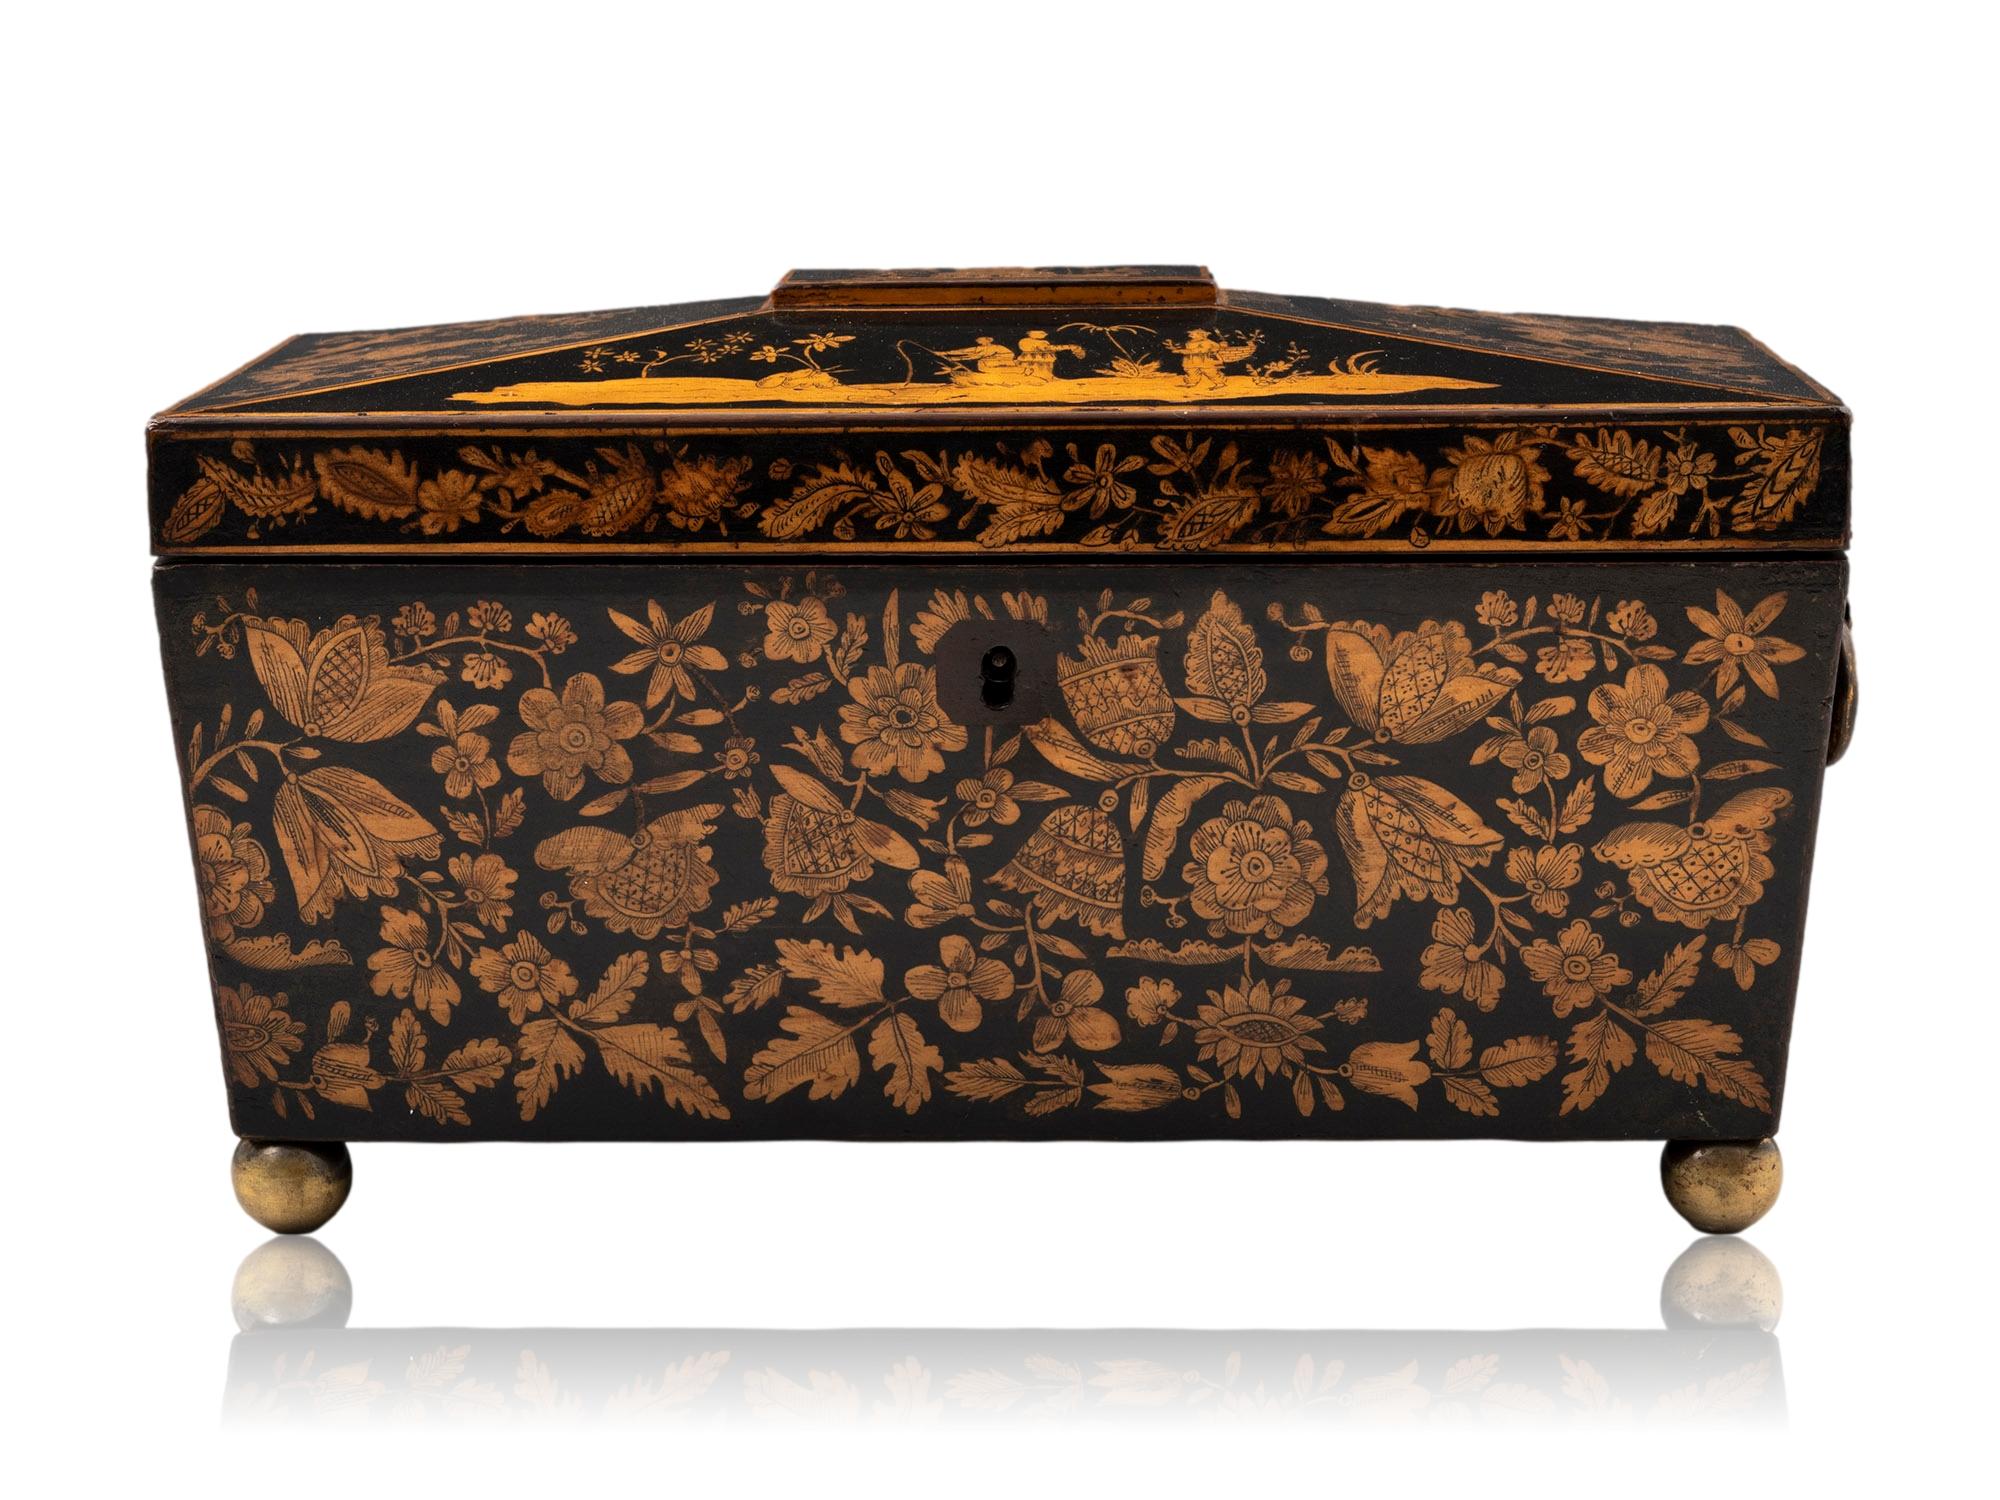 From our Tea Caddy collection, we are delighted to offer this Regency Chinoiserie Penwork Tea Chest. The Tea Chest of rectangular form sits upon four brass ball feet with matching brass twin loop handles to either side. Crafted from Sycamore the Tea